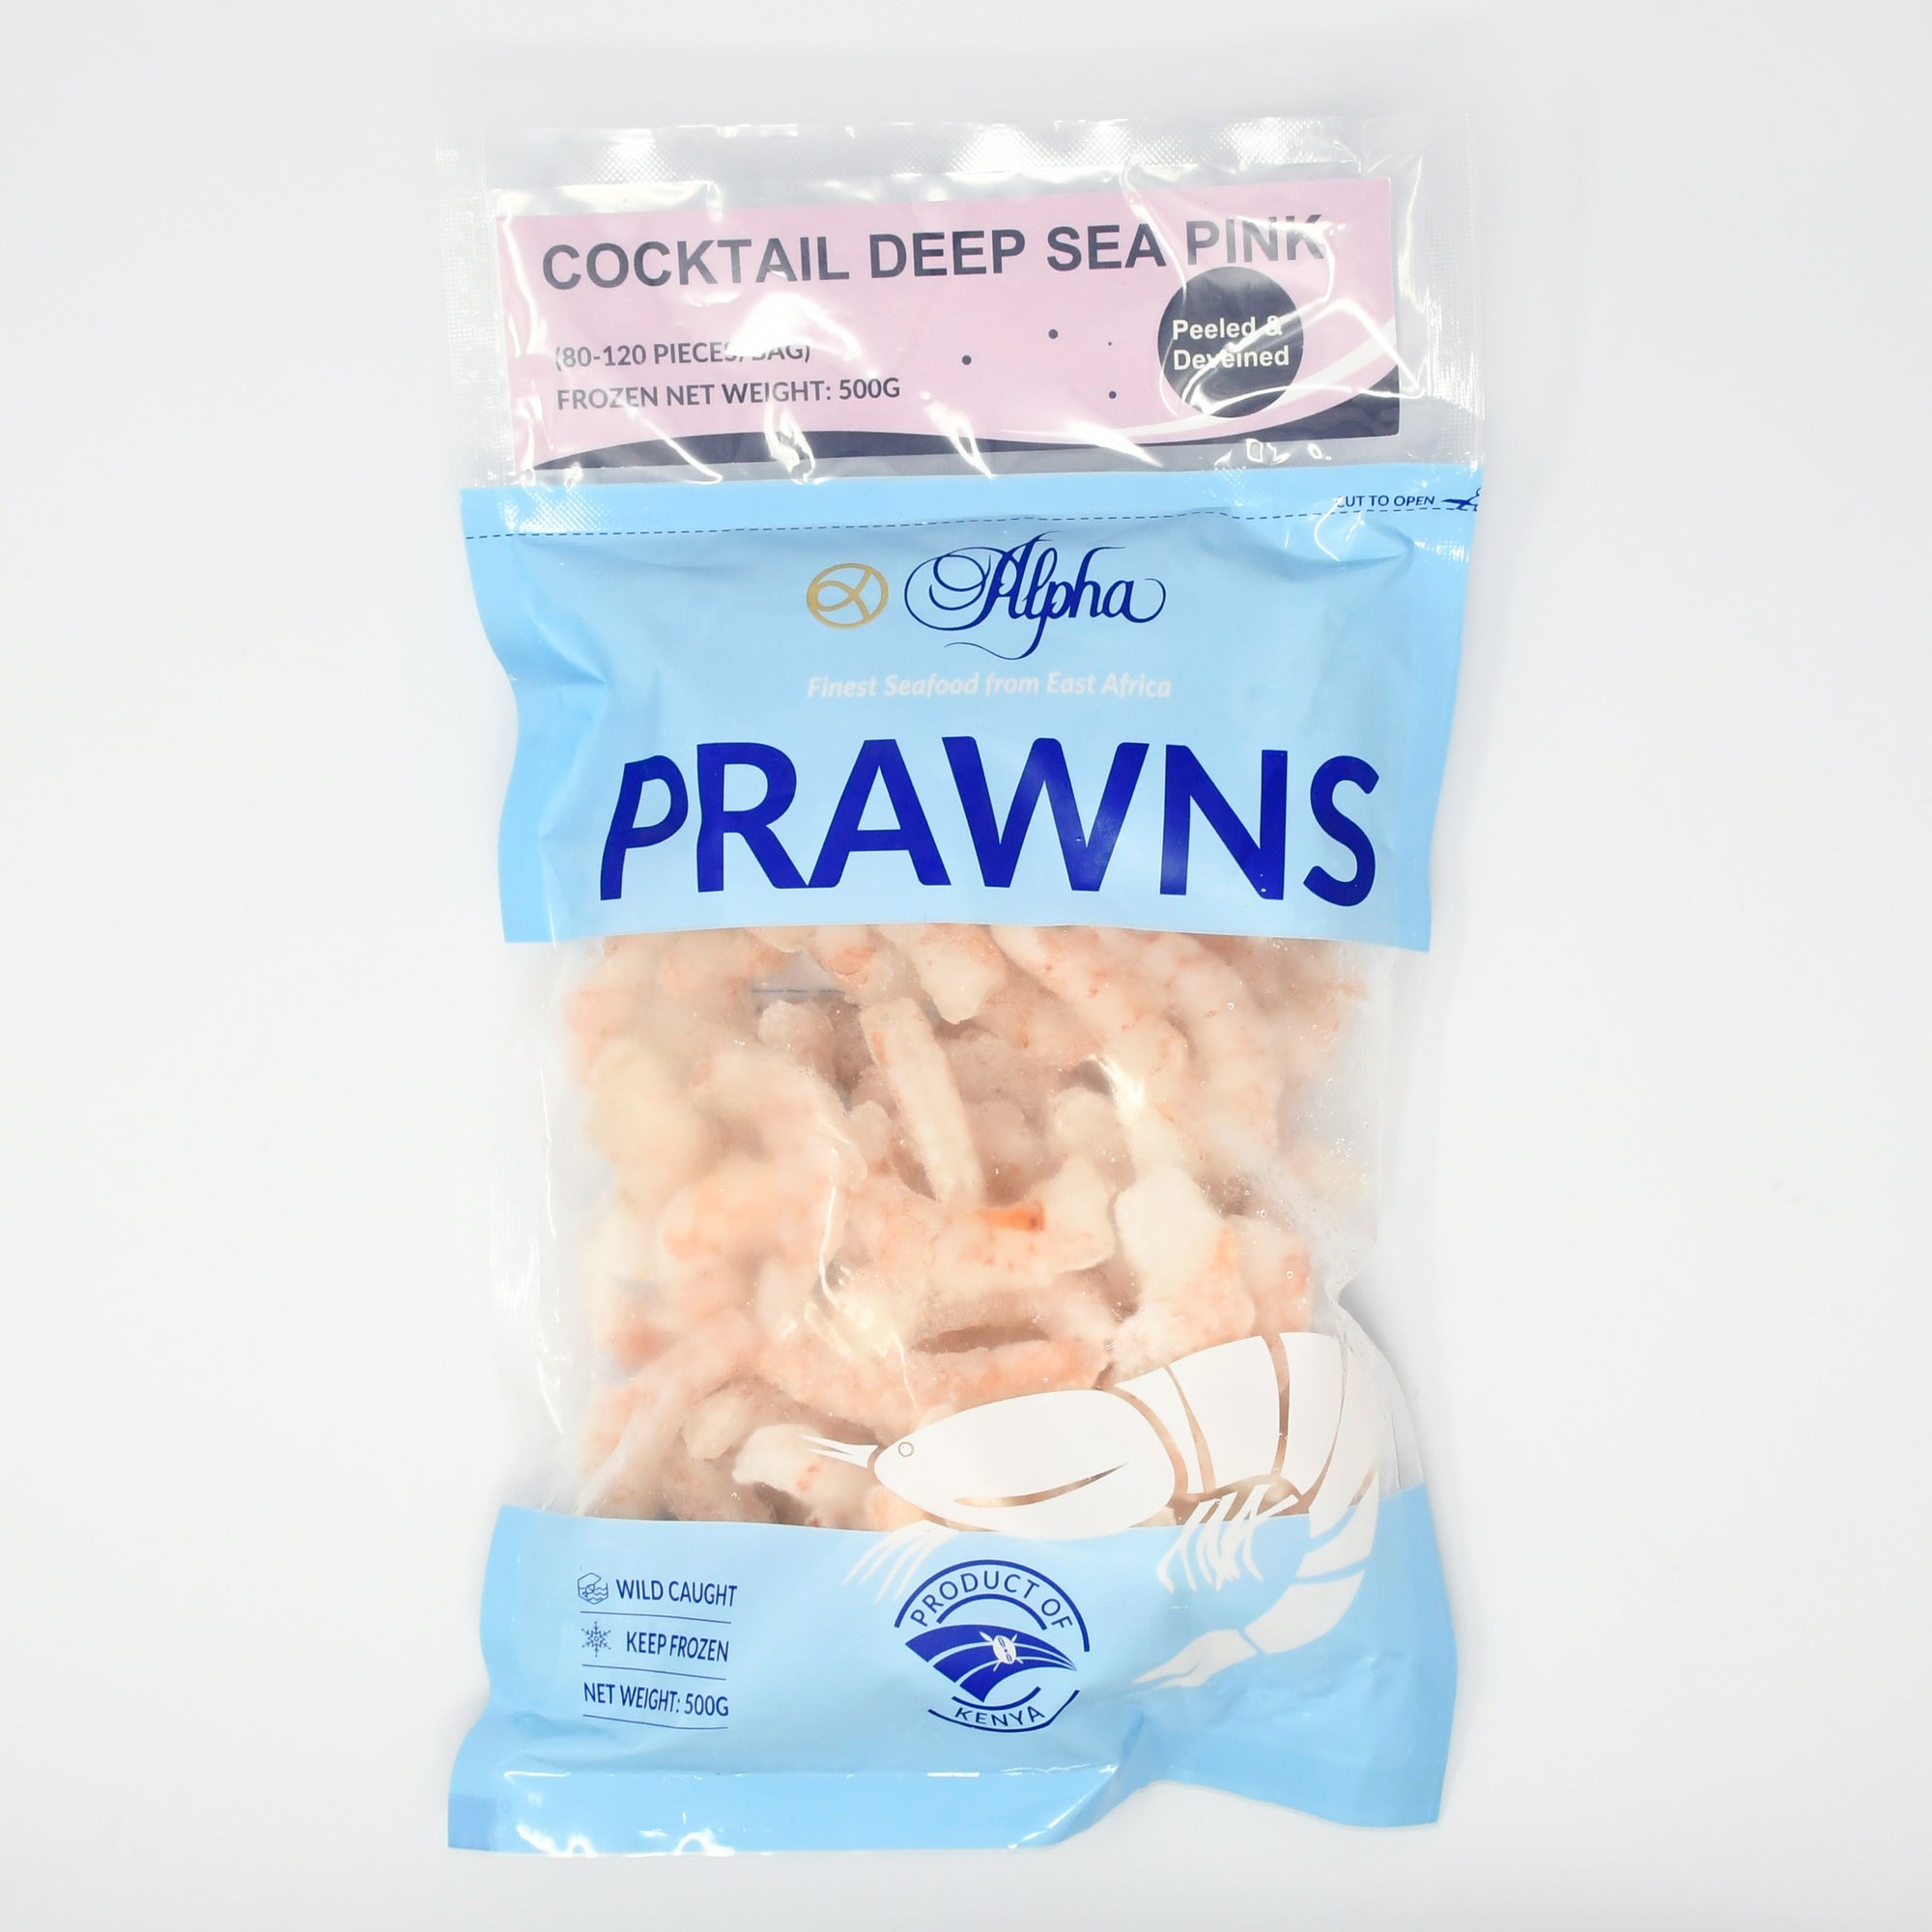 COCKTAIL (SMALL) DEEP SEA PRAWNS (Peeled and Deveined) (500g)